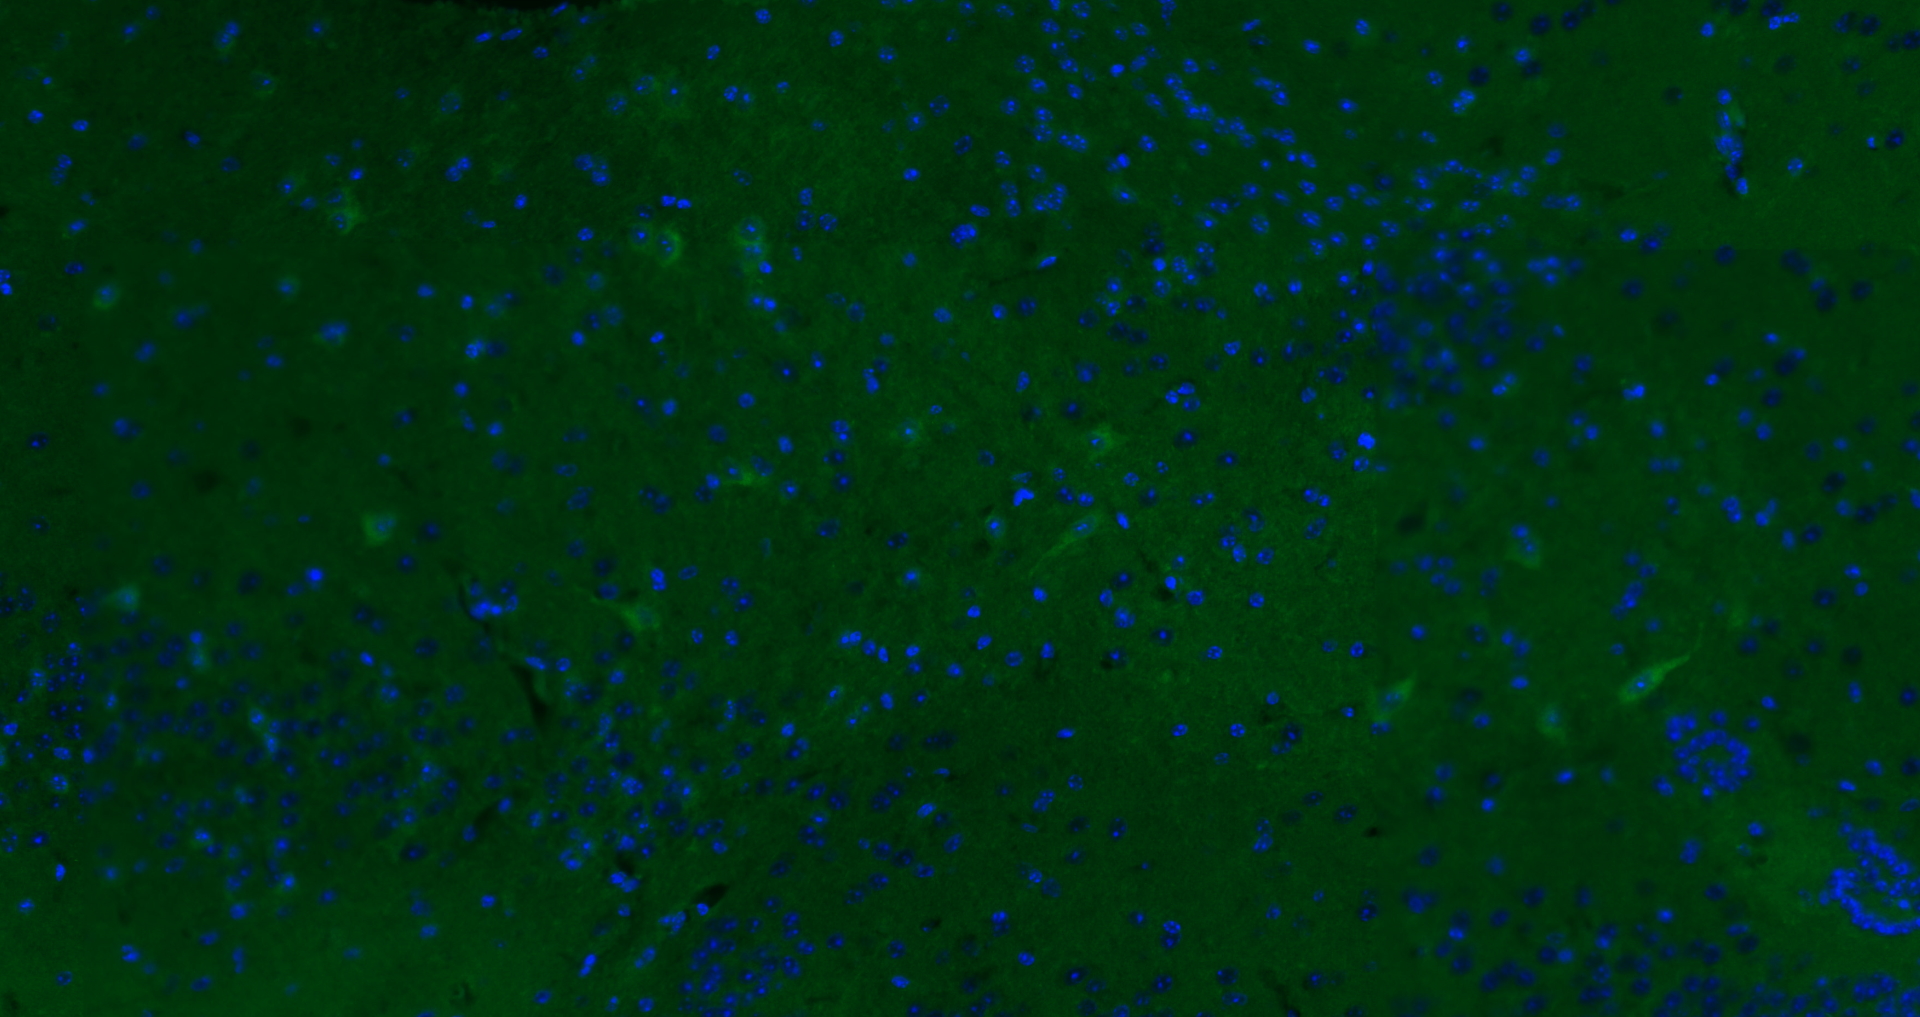 Paraformaldehyde-fixed, paraffin embedded (mouse brain); Antigen retrieval by boiling in sodium citrate buffer (pH6.0) for 15min; Blocking buffer (normal goat serum) at 37°C for 30min; Antibody incubation with (KCNG3) Polyclonal Antibody, Unconjugated (bs-12175R) at 1:200 overnight at 4°C, followed by a conjugated Goat Anti-Rabbit IgG antibody (bs-0295G-AF488) for 90 minutes, and DAPI for nuclei staining.